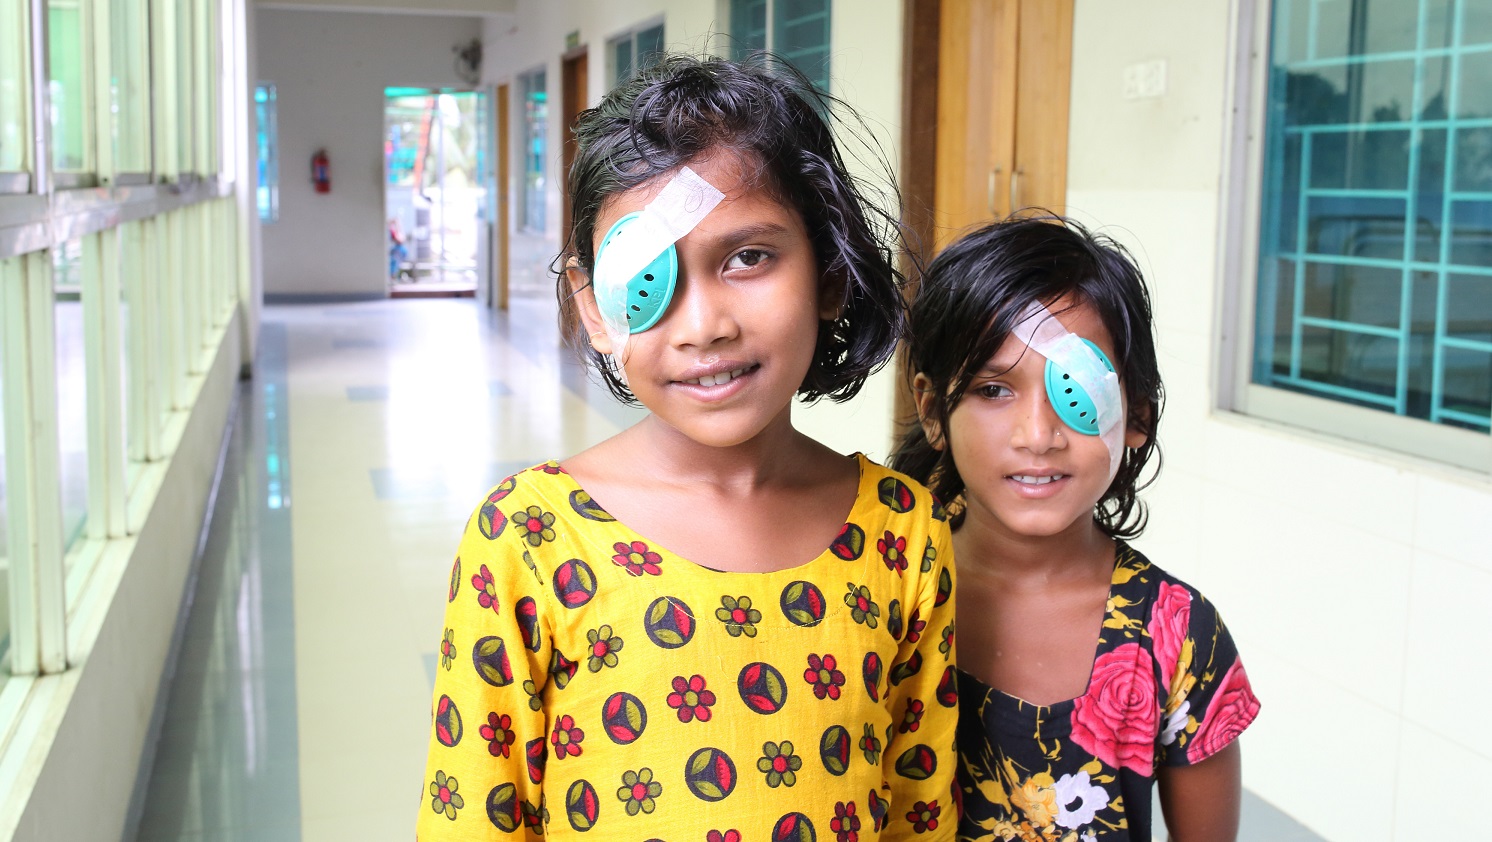 Two young girls stand together in a hospital corridor. Both are wearing colourful clothes, and have smiles on their faces. Both were wearing temporary eye patches after receiving eye surgery.